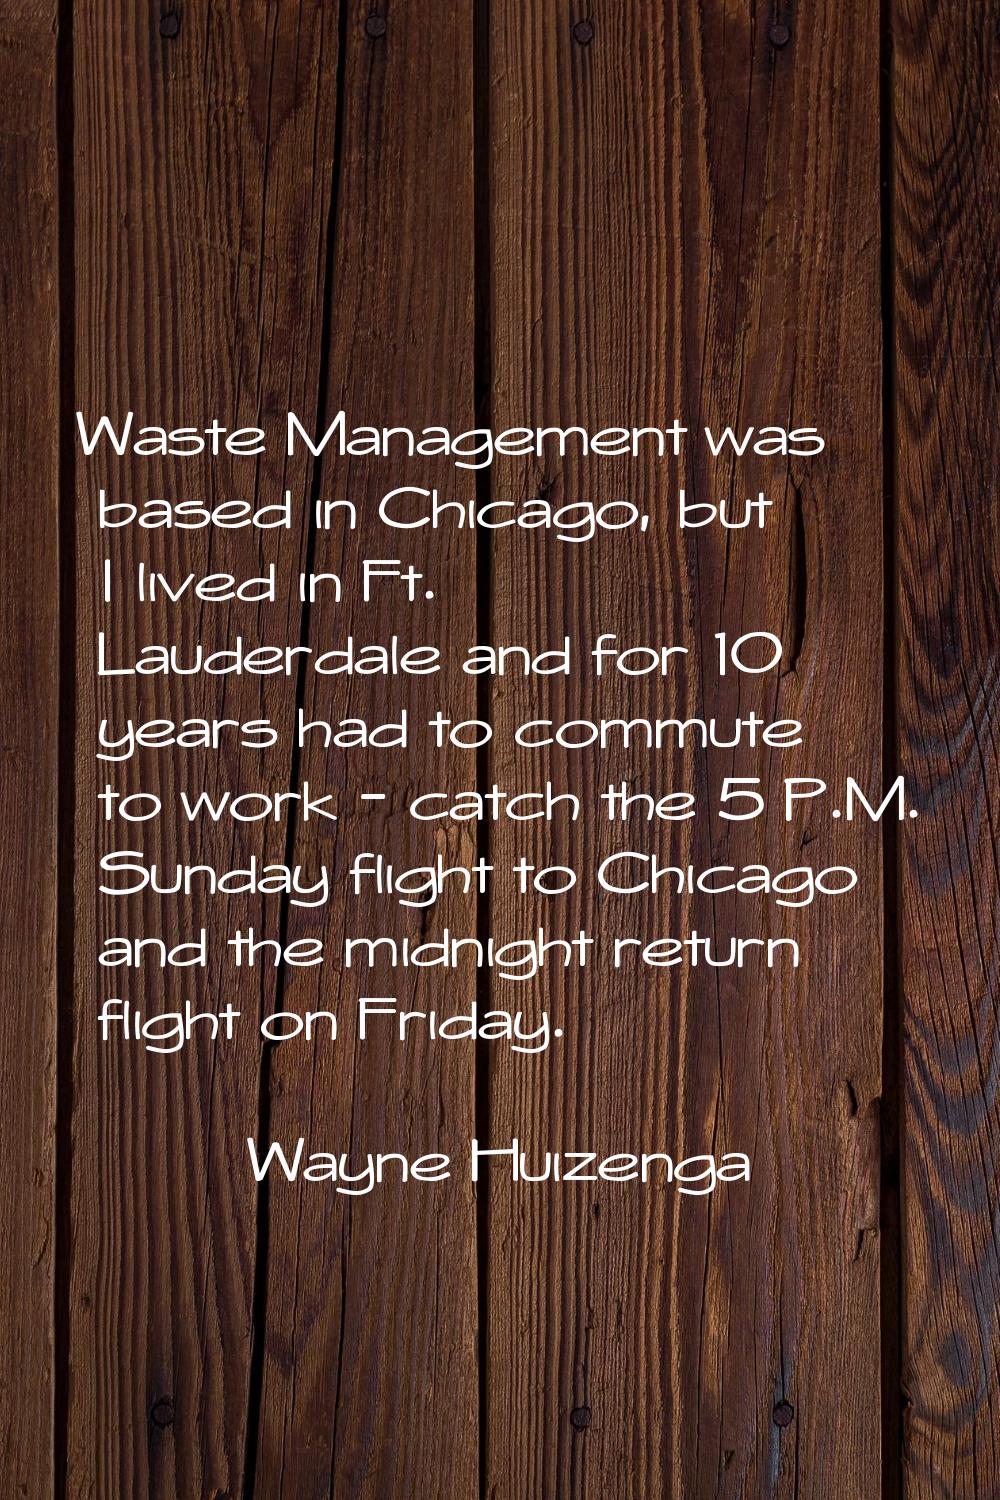 Waste Management was based in Chicago, but I lived in Ft. Lauderdale and for 10 years had to commut